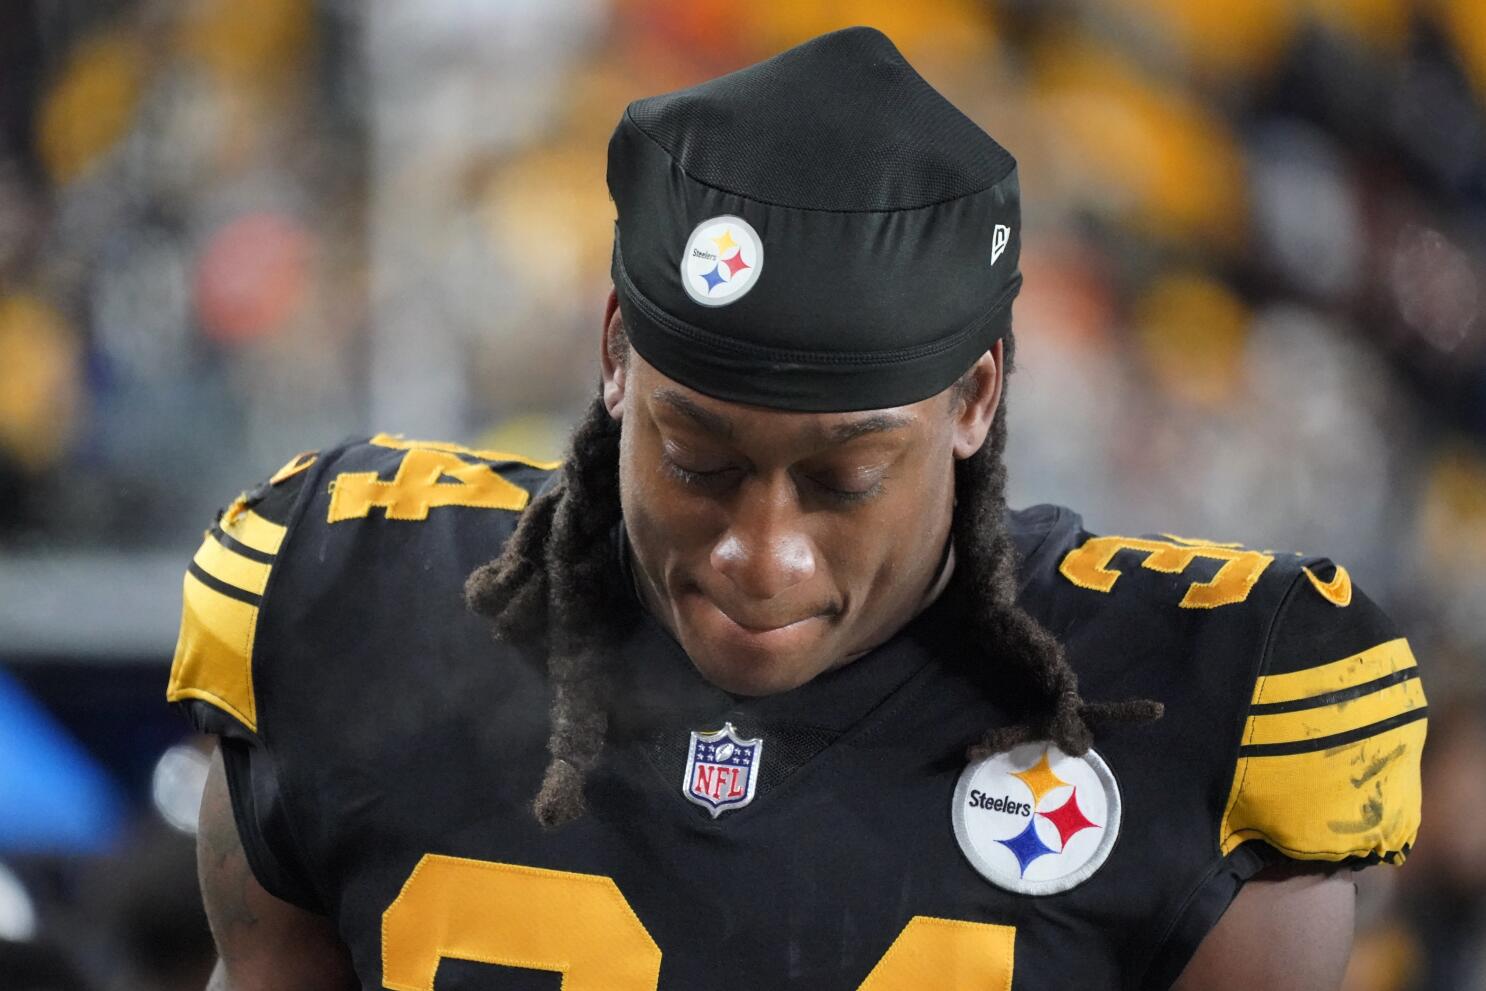 Steelers again wear throwback uniforms that should be thrown back